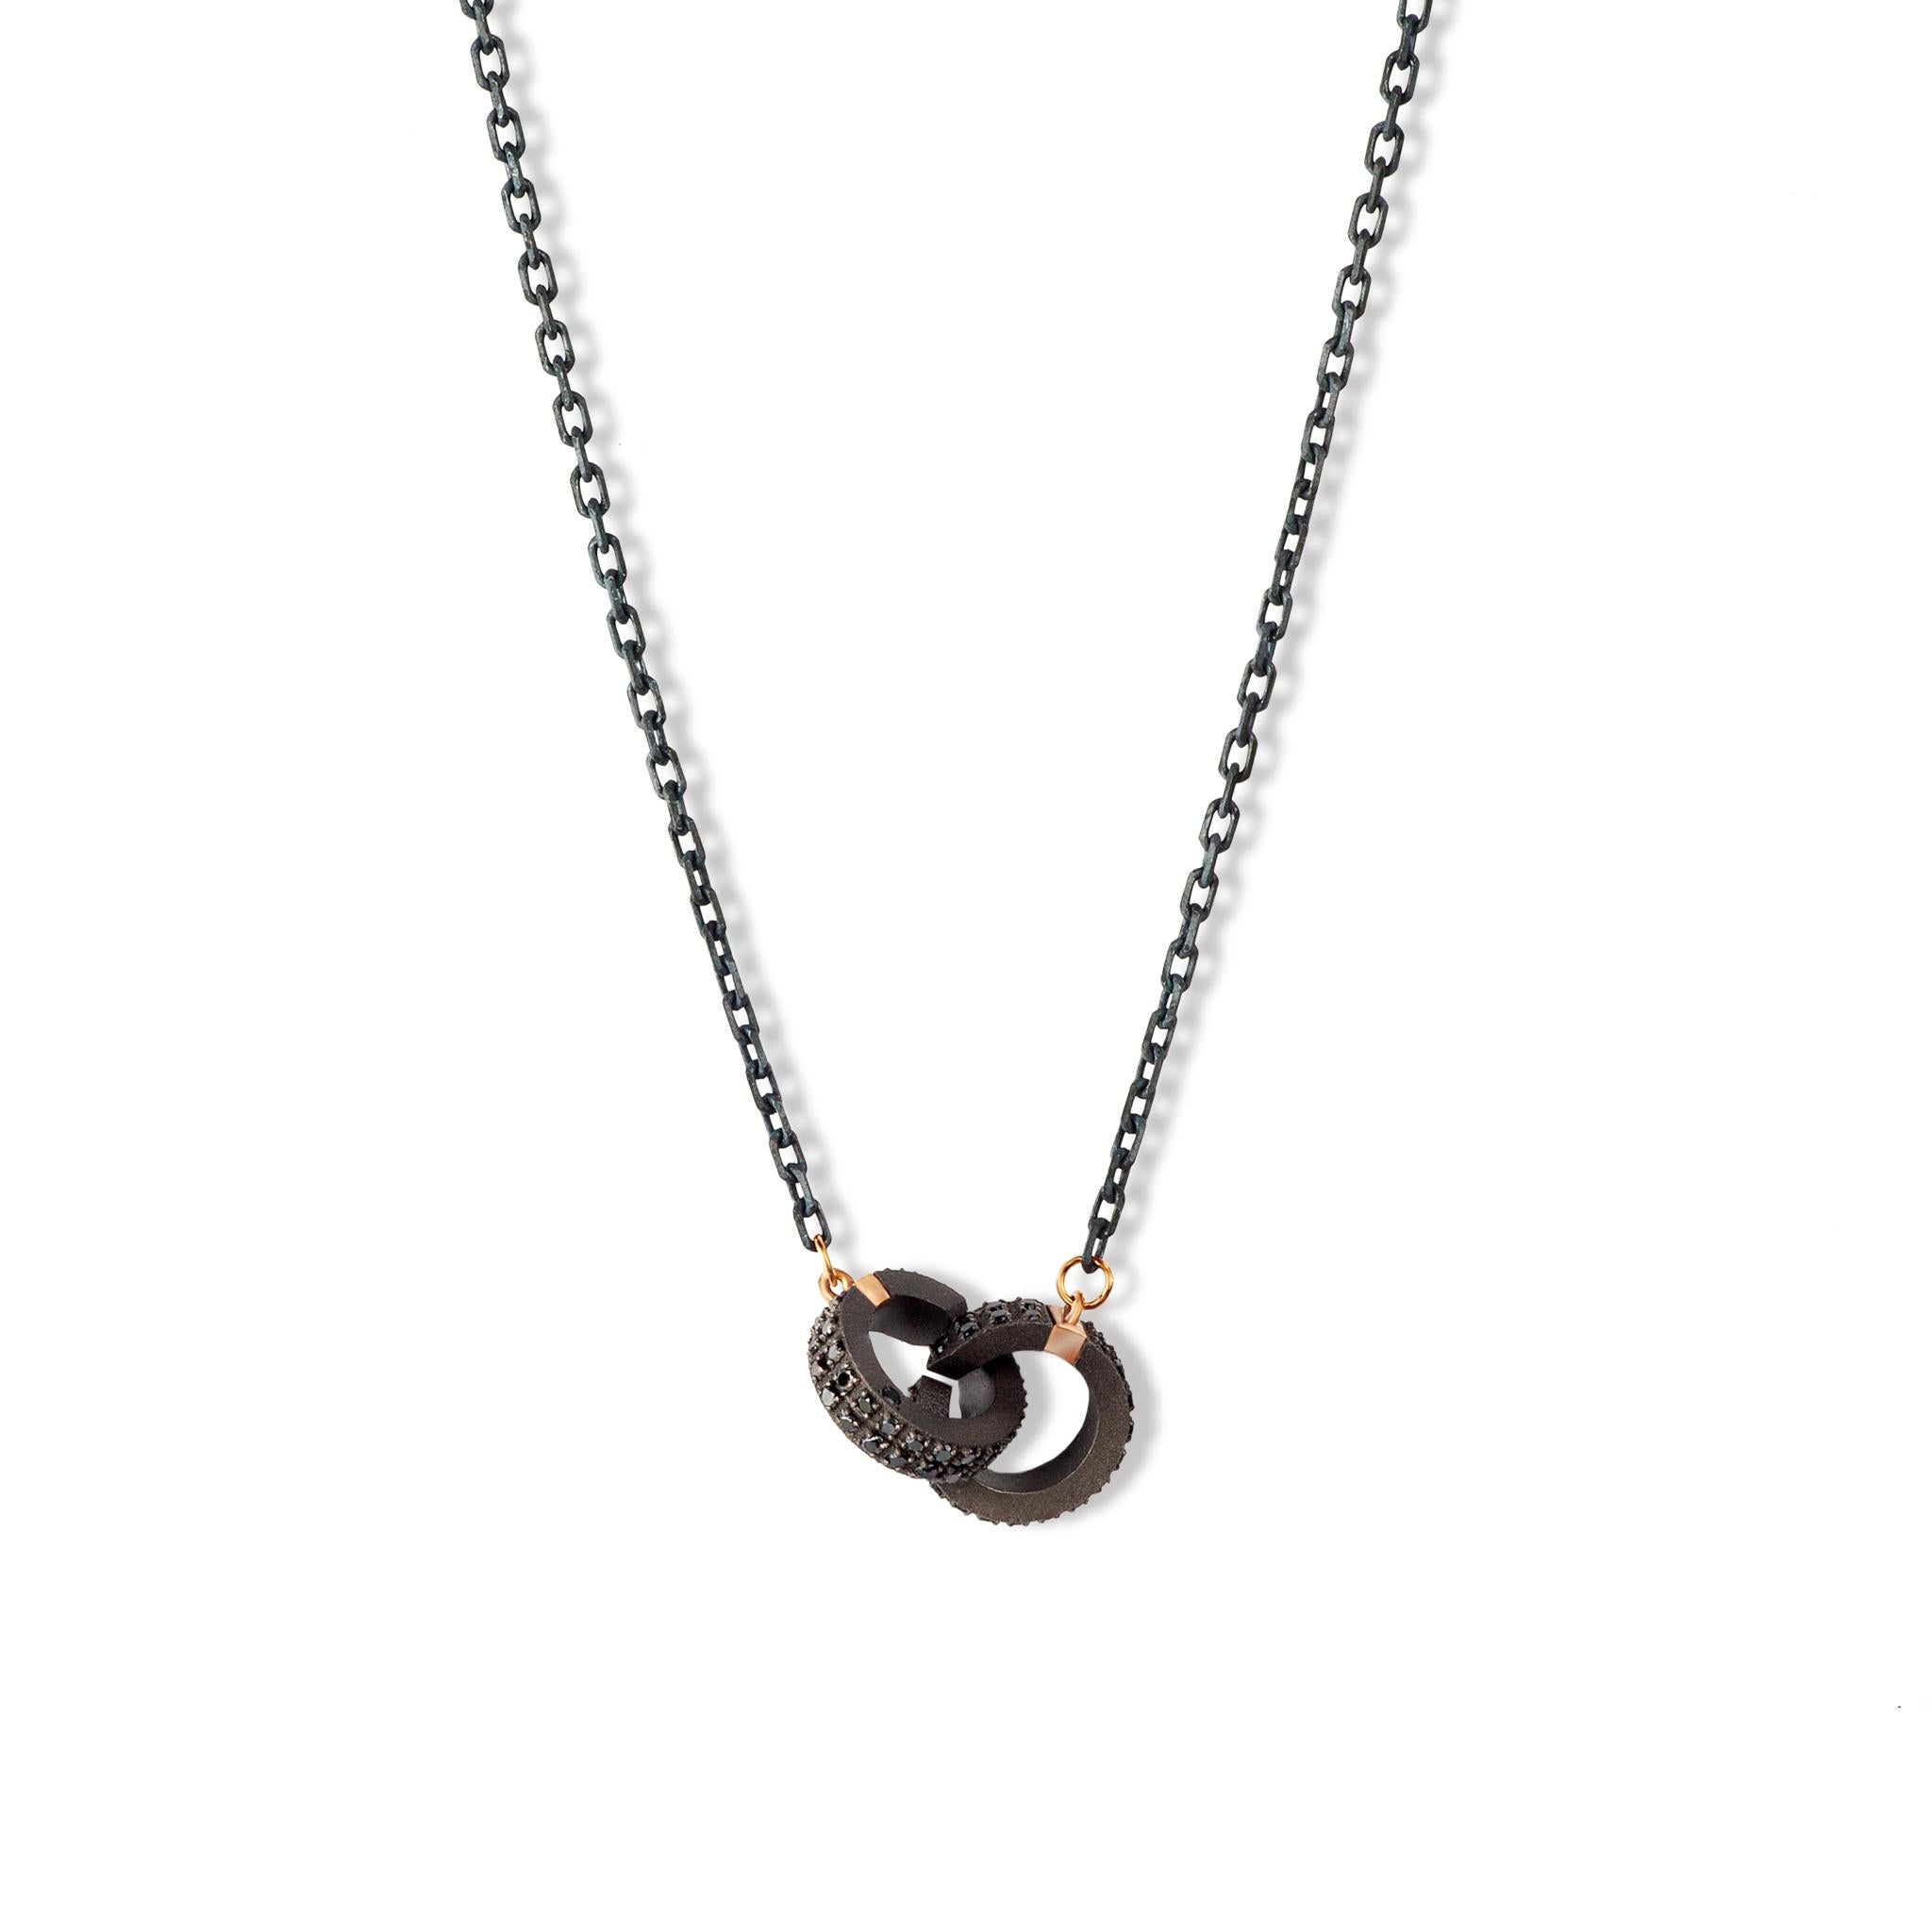 Men's necklace in titanium, 18 kt red gold, black diamonds and chain. The pendant, the necklace's main element, is made up of two titanium barrels hooked together but jointed. Completely covered with black diamonds, they both have two precious 18 kt